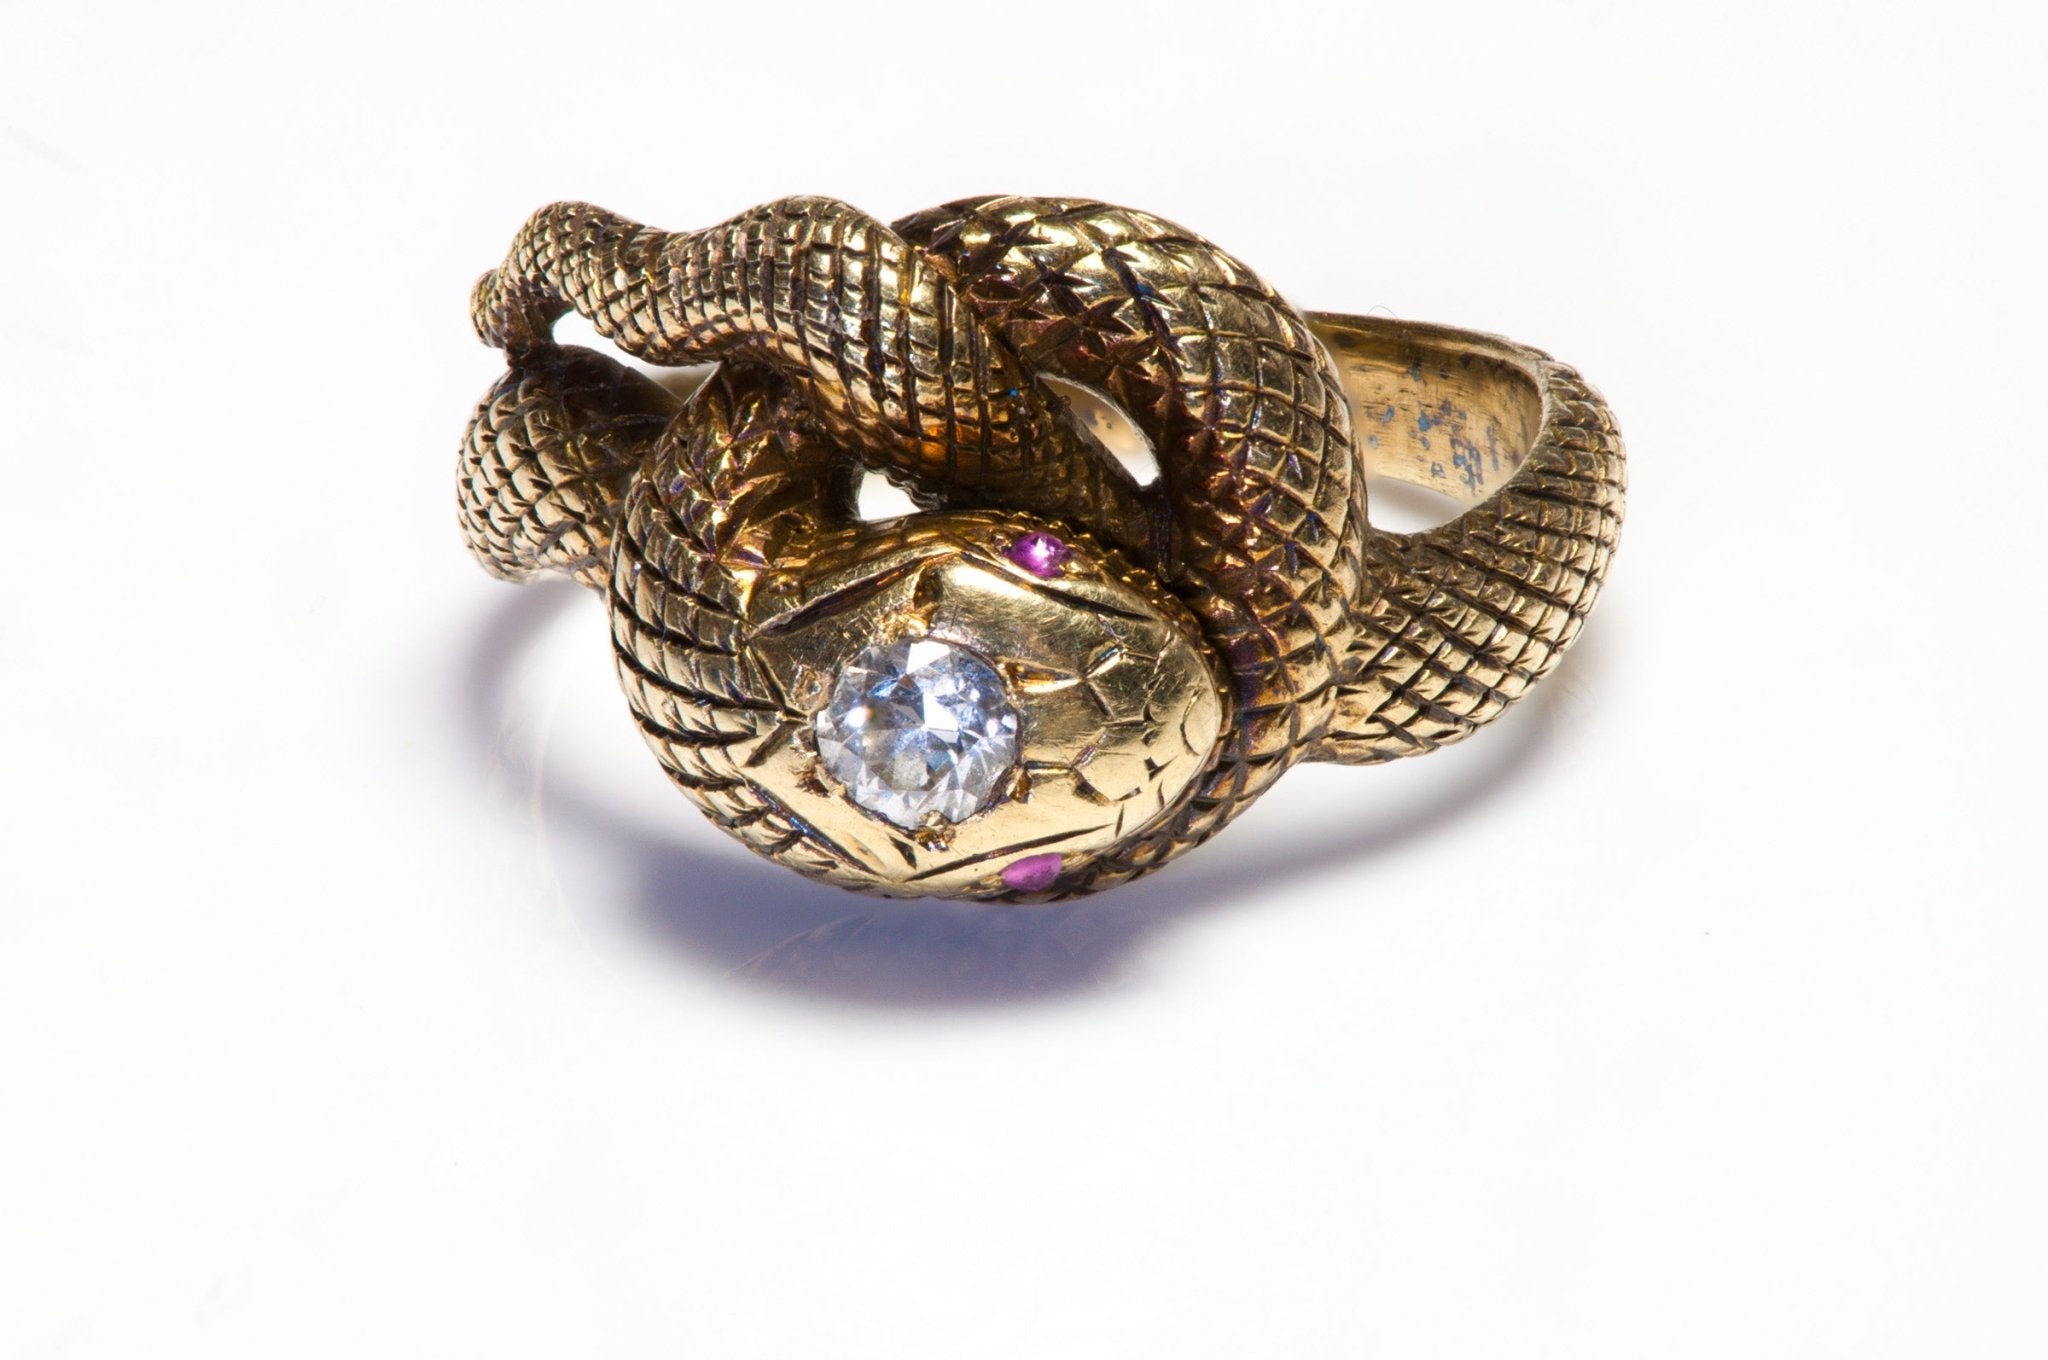 Antique Snake Gold Diamond Ring by Larter & Sons - DSF Antique Jewelry